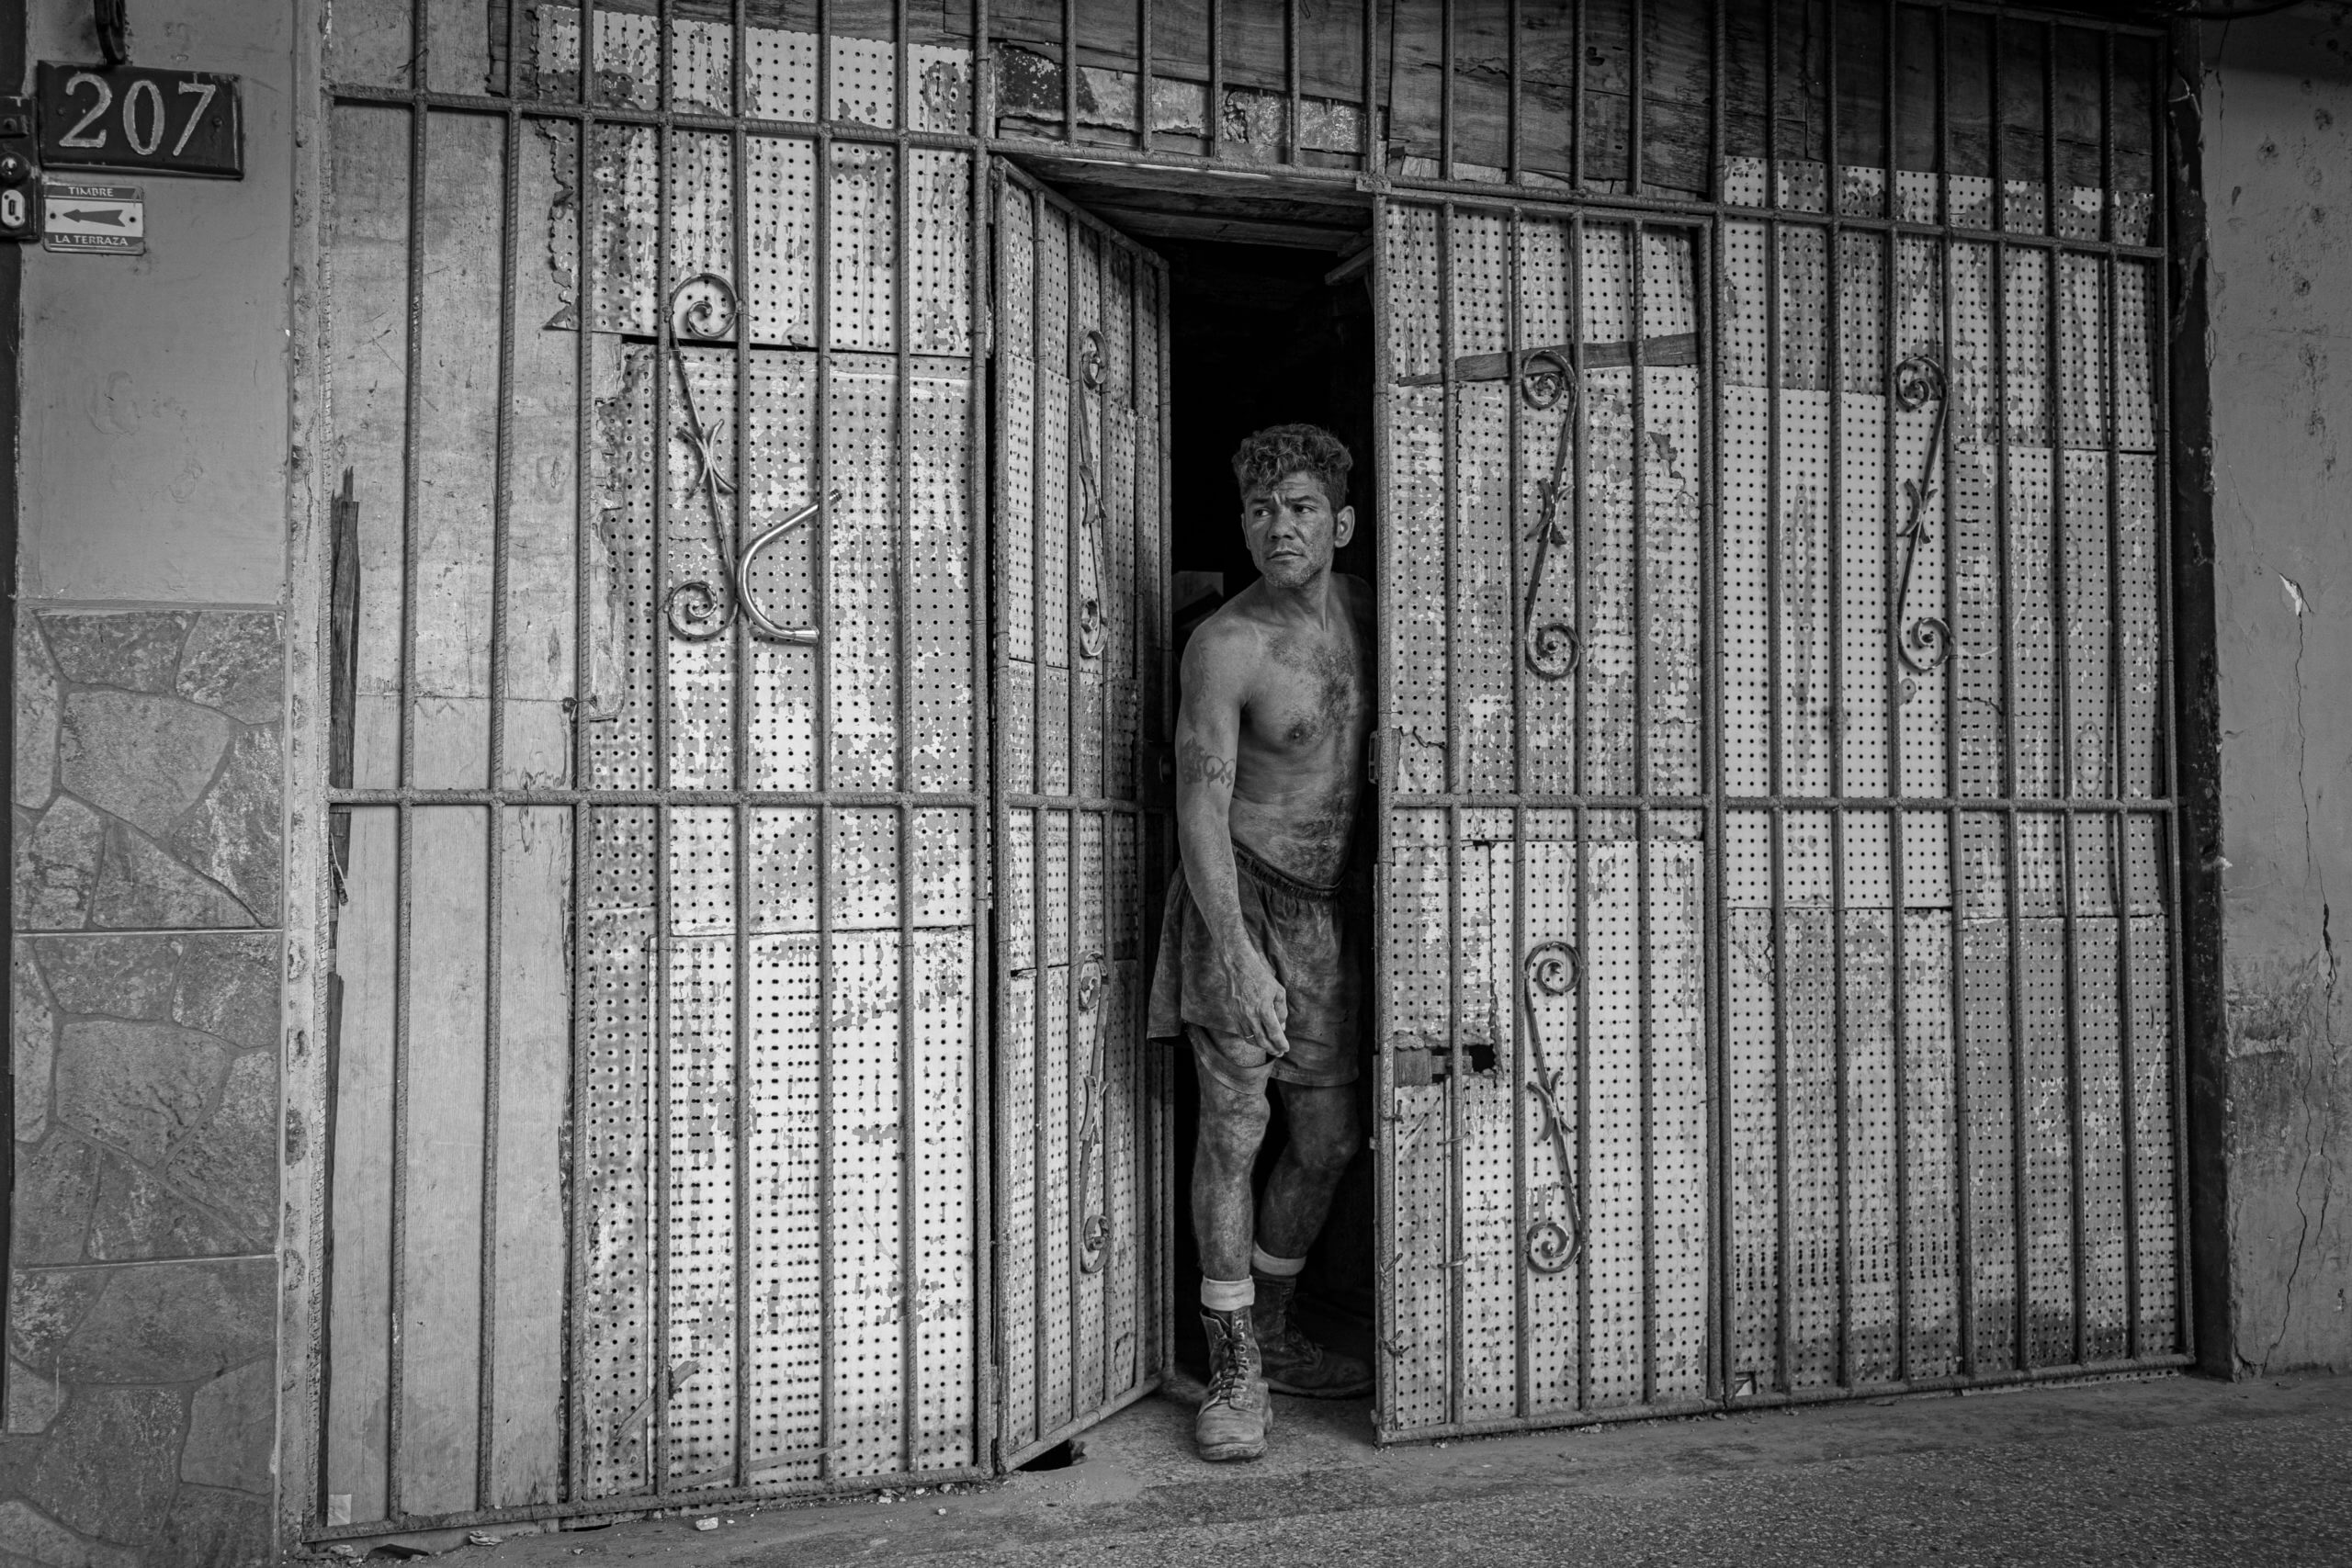 A mason scrutinizes the area outside a house he is remodeling in the Habana Centro district of the island nation's capital. © 2022 John D. Elliott • www.TheHumanPulse.com